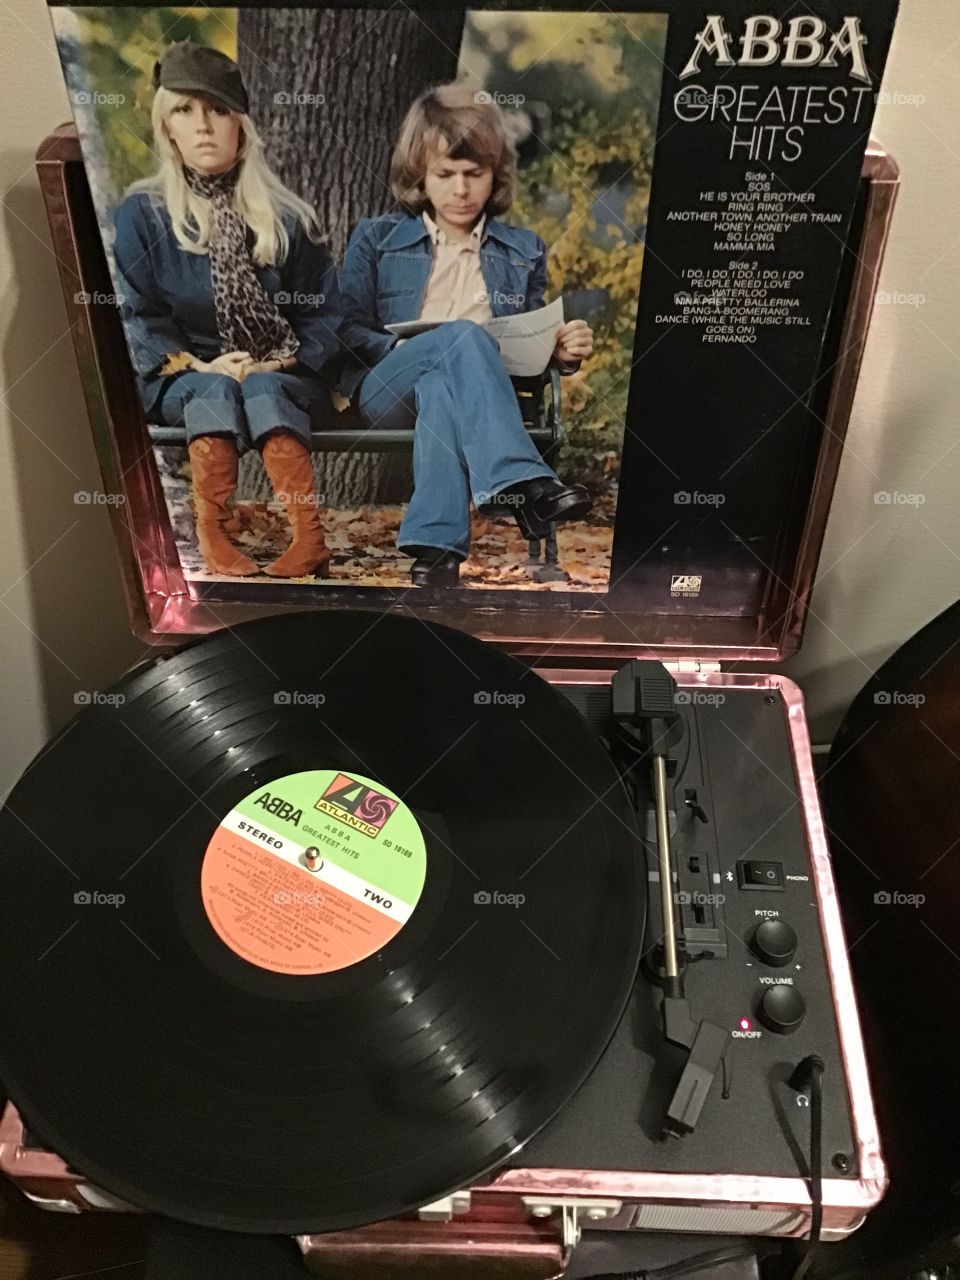 Listening to ABBA on LP